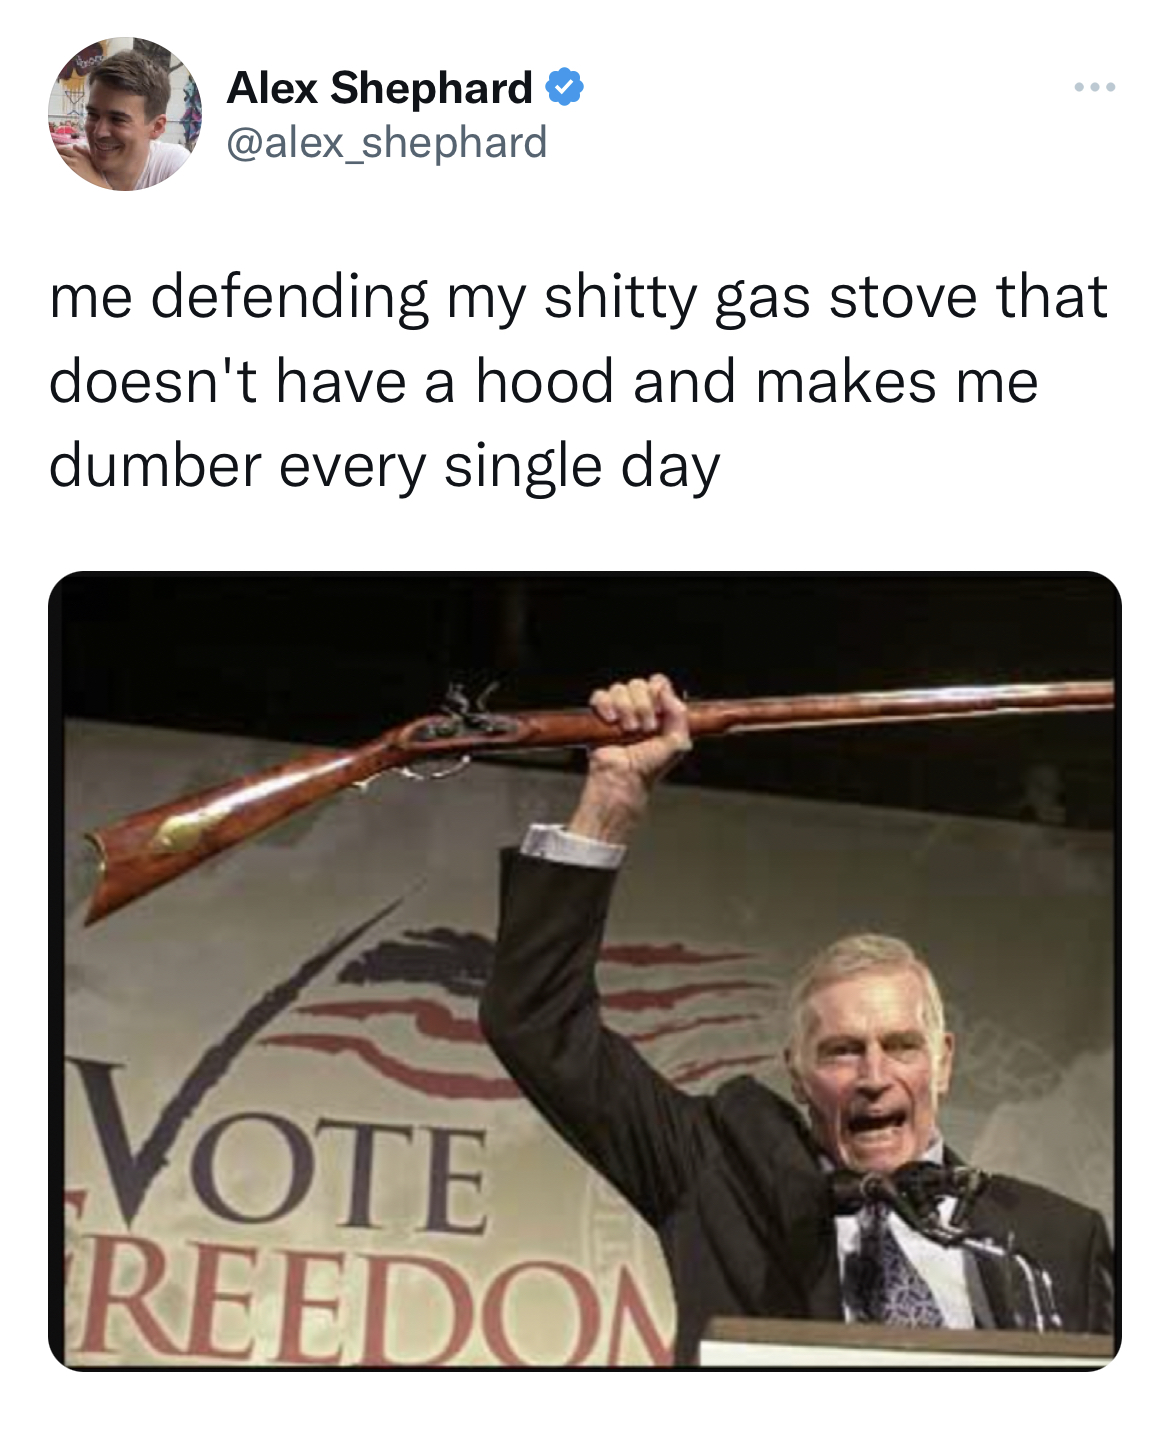 Gas Stove Ban Memes national rifle association - Alex Shephard me defending my shitty gas stove that doesn't have a hood and makes me dumber every single day Vote Reedon